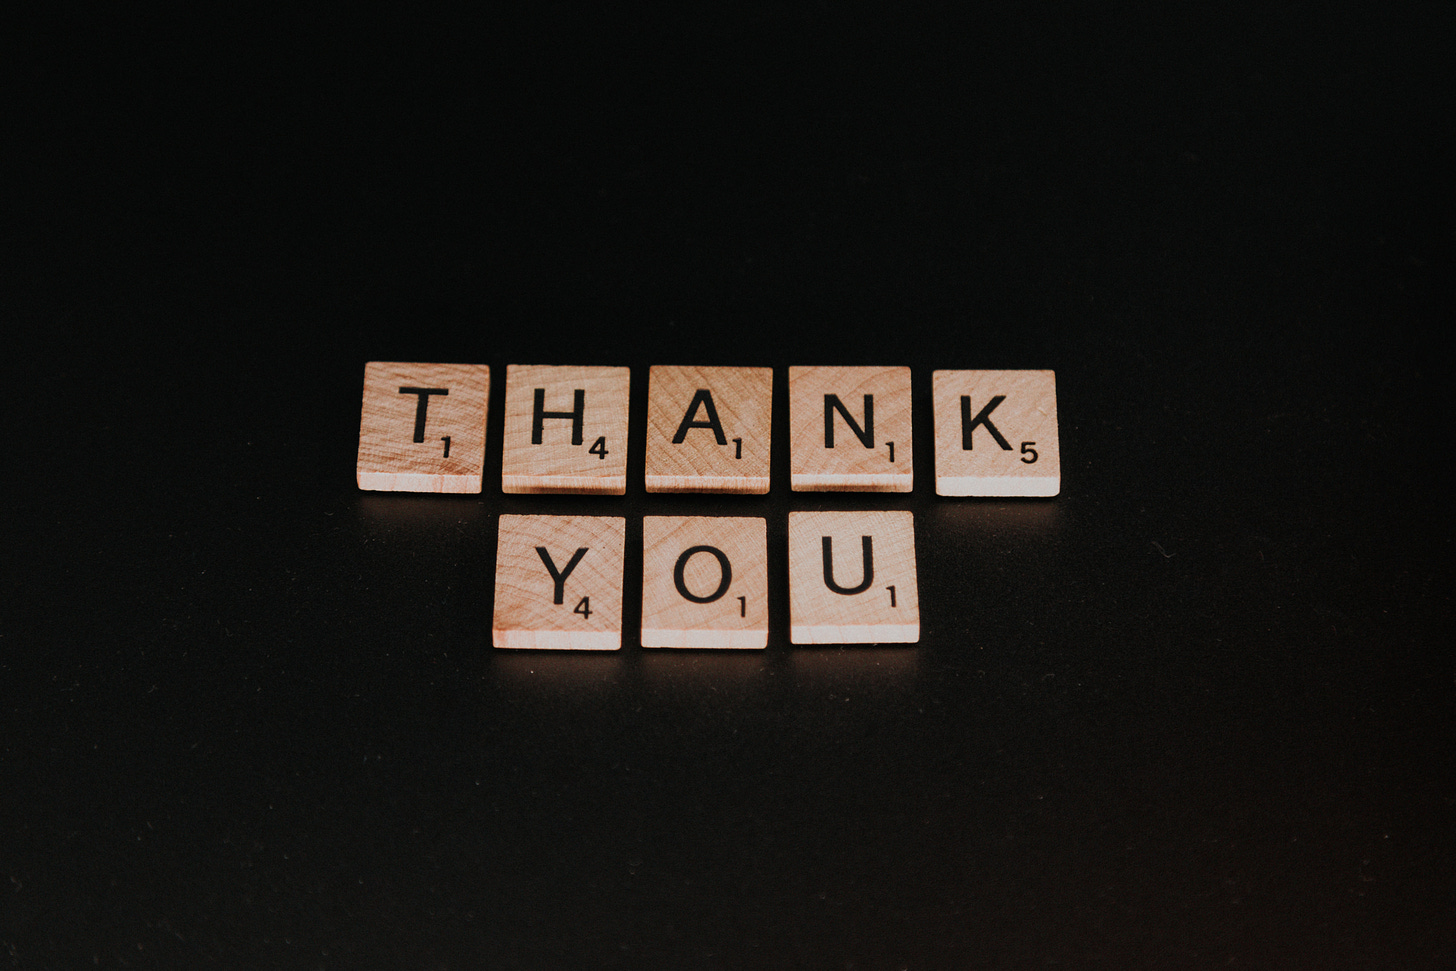 Scrabble tiles spelling out "Thank you" set against a black background. Thank is on the top row, you on the bottom.